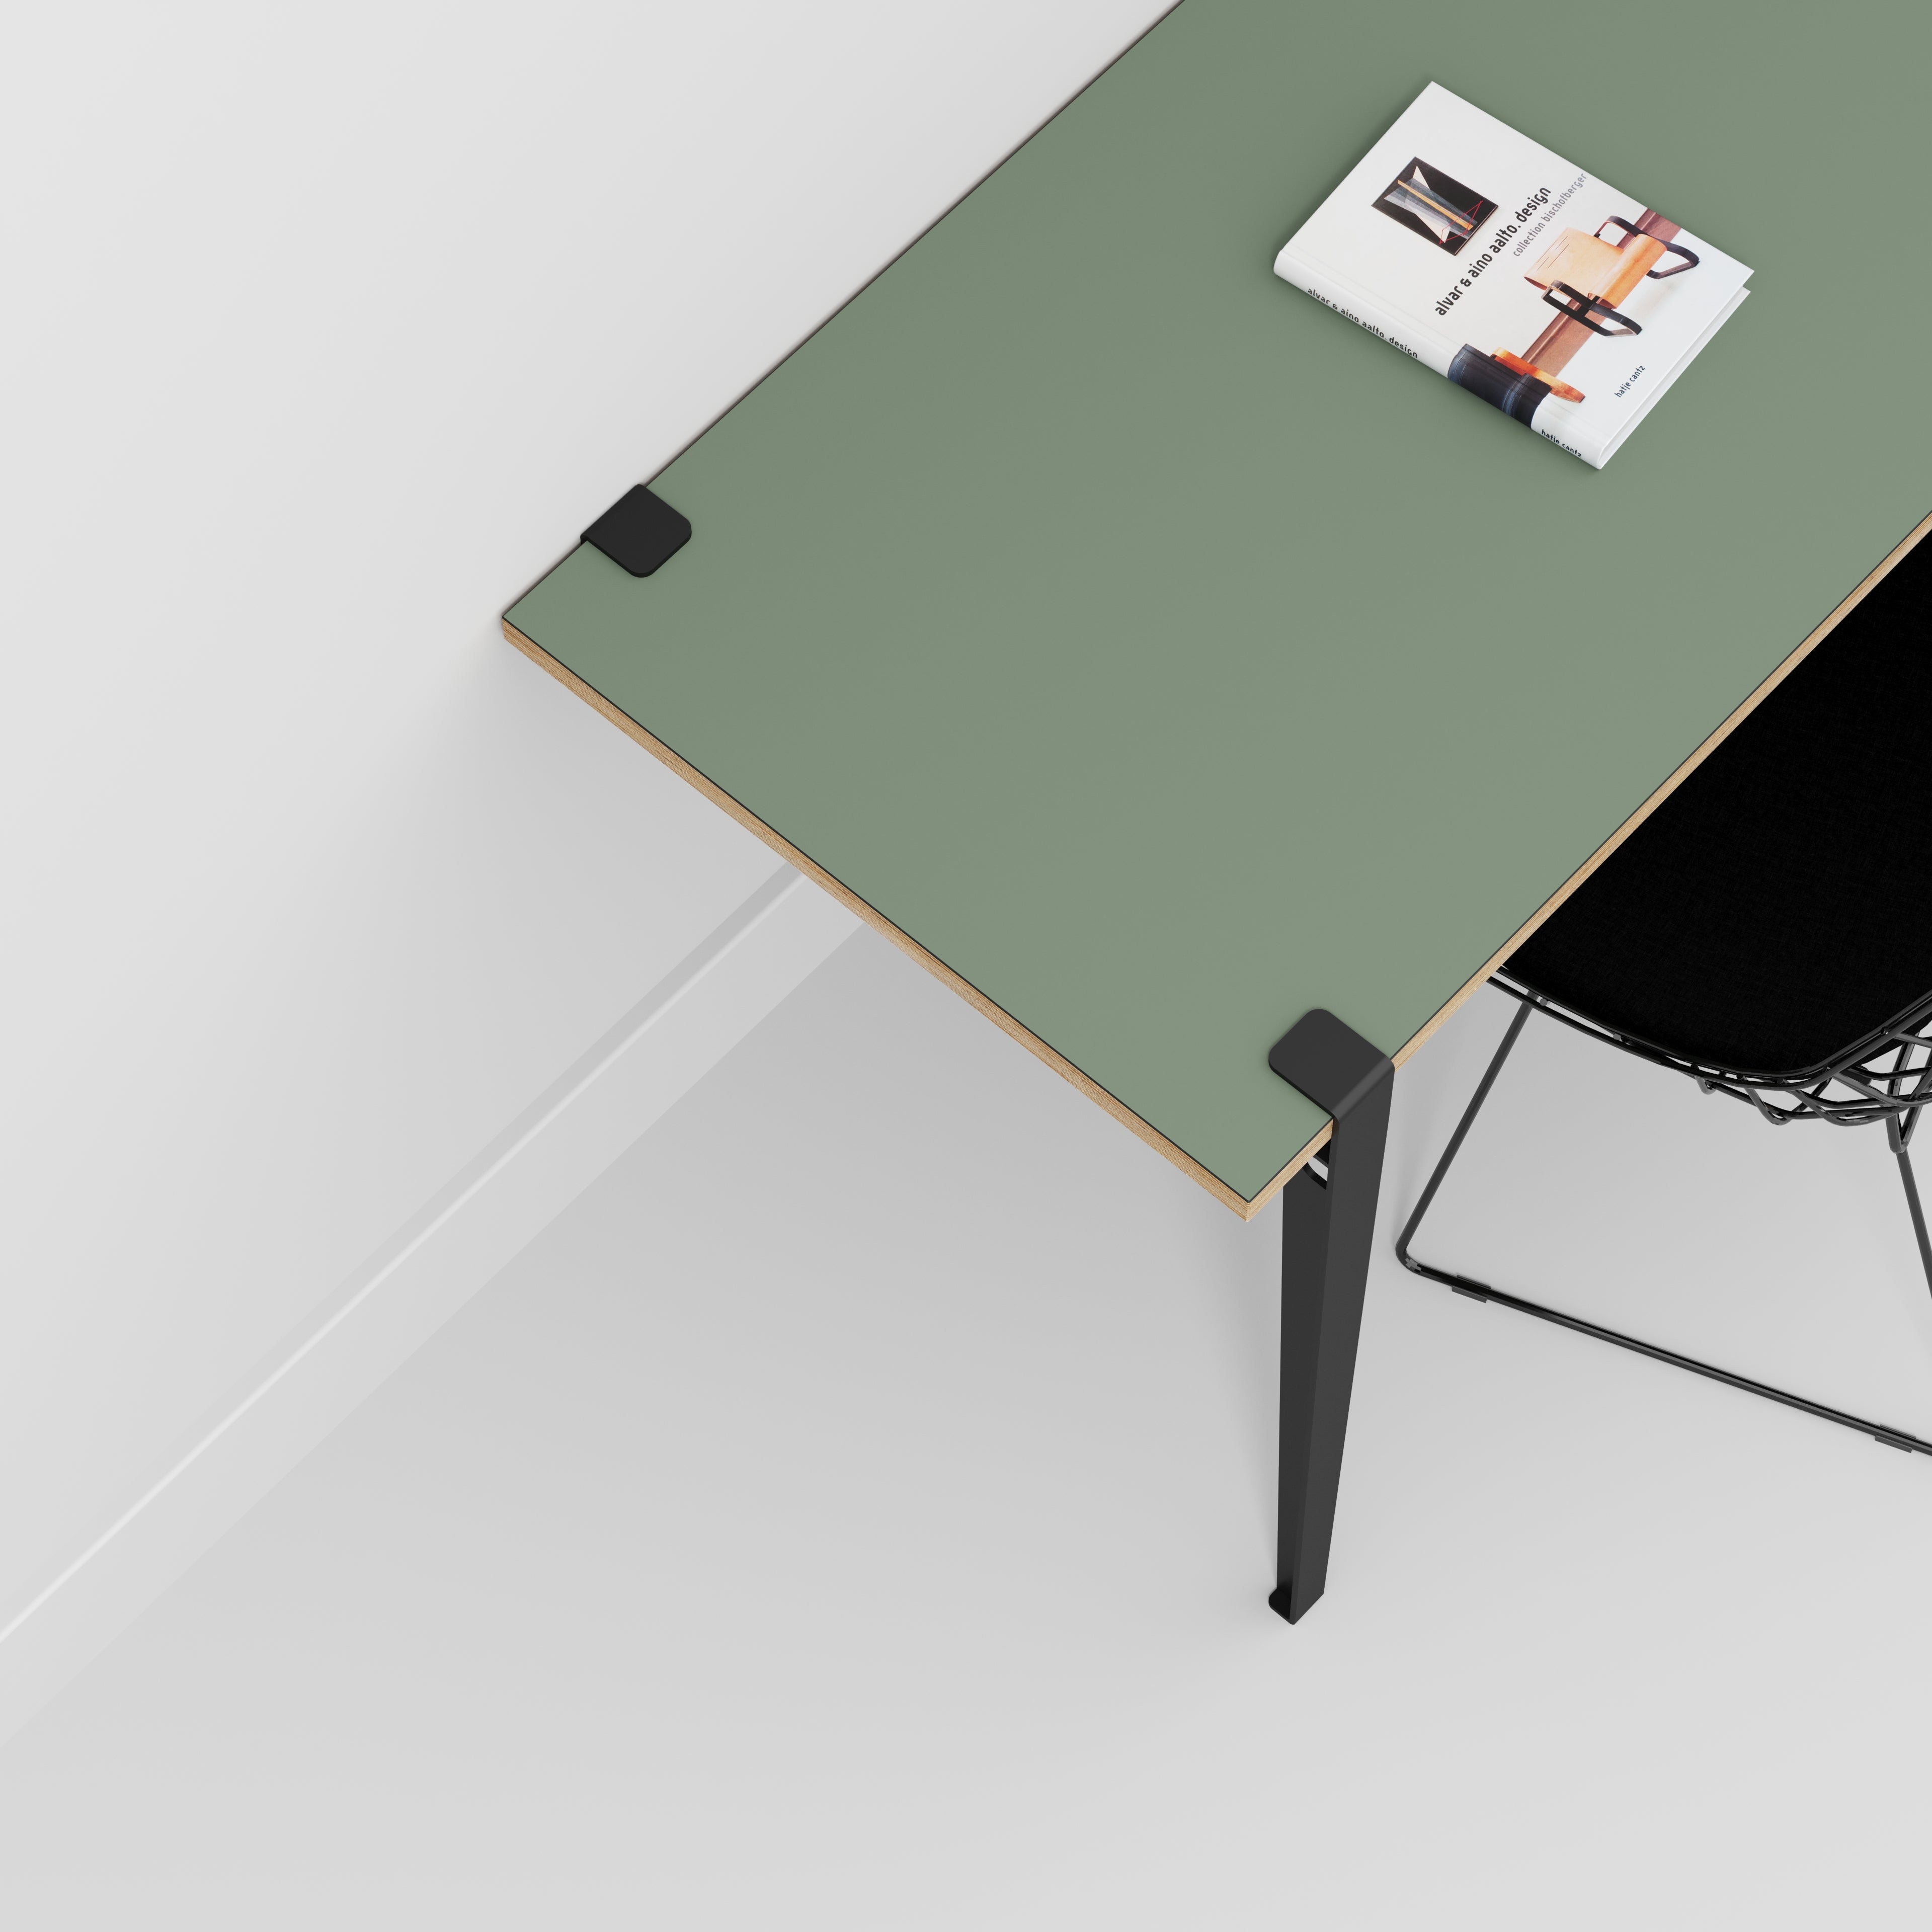 Wall Desk with Black Tiptoe Legs and Brackets - Formica Green Slate - 1200(w) x 600(d) x 750(h)